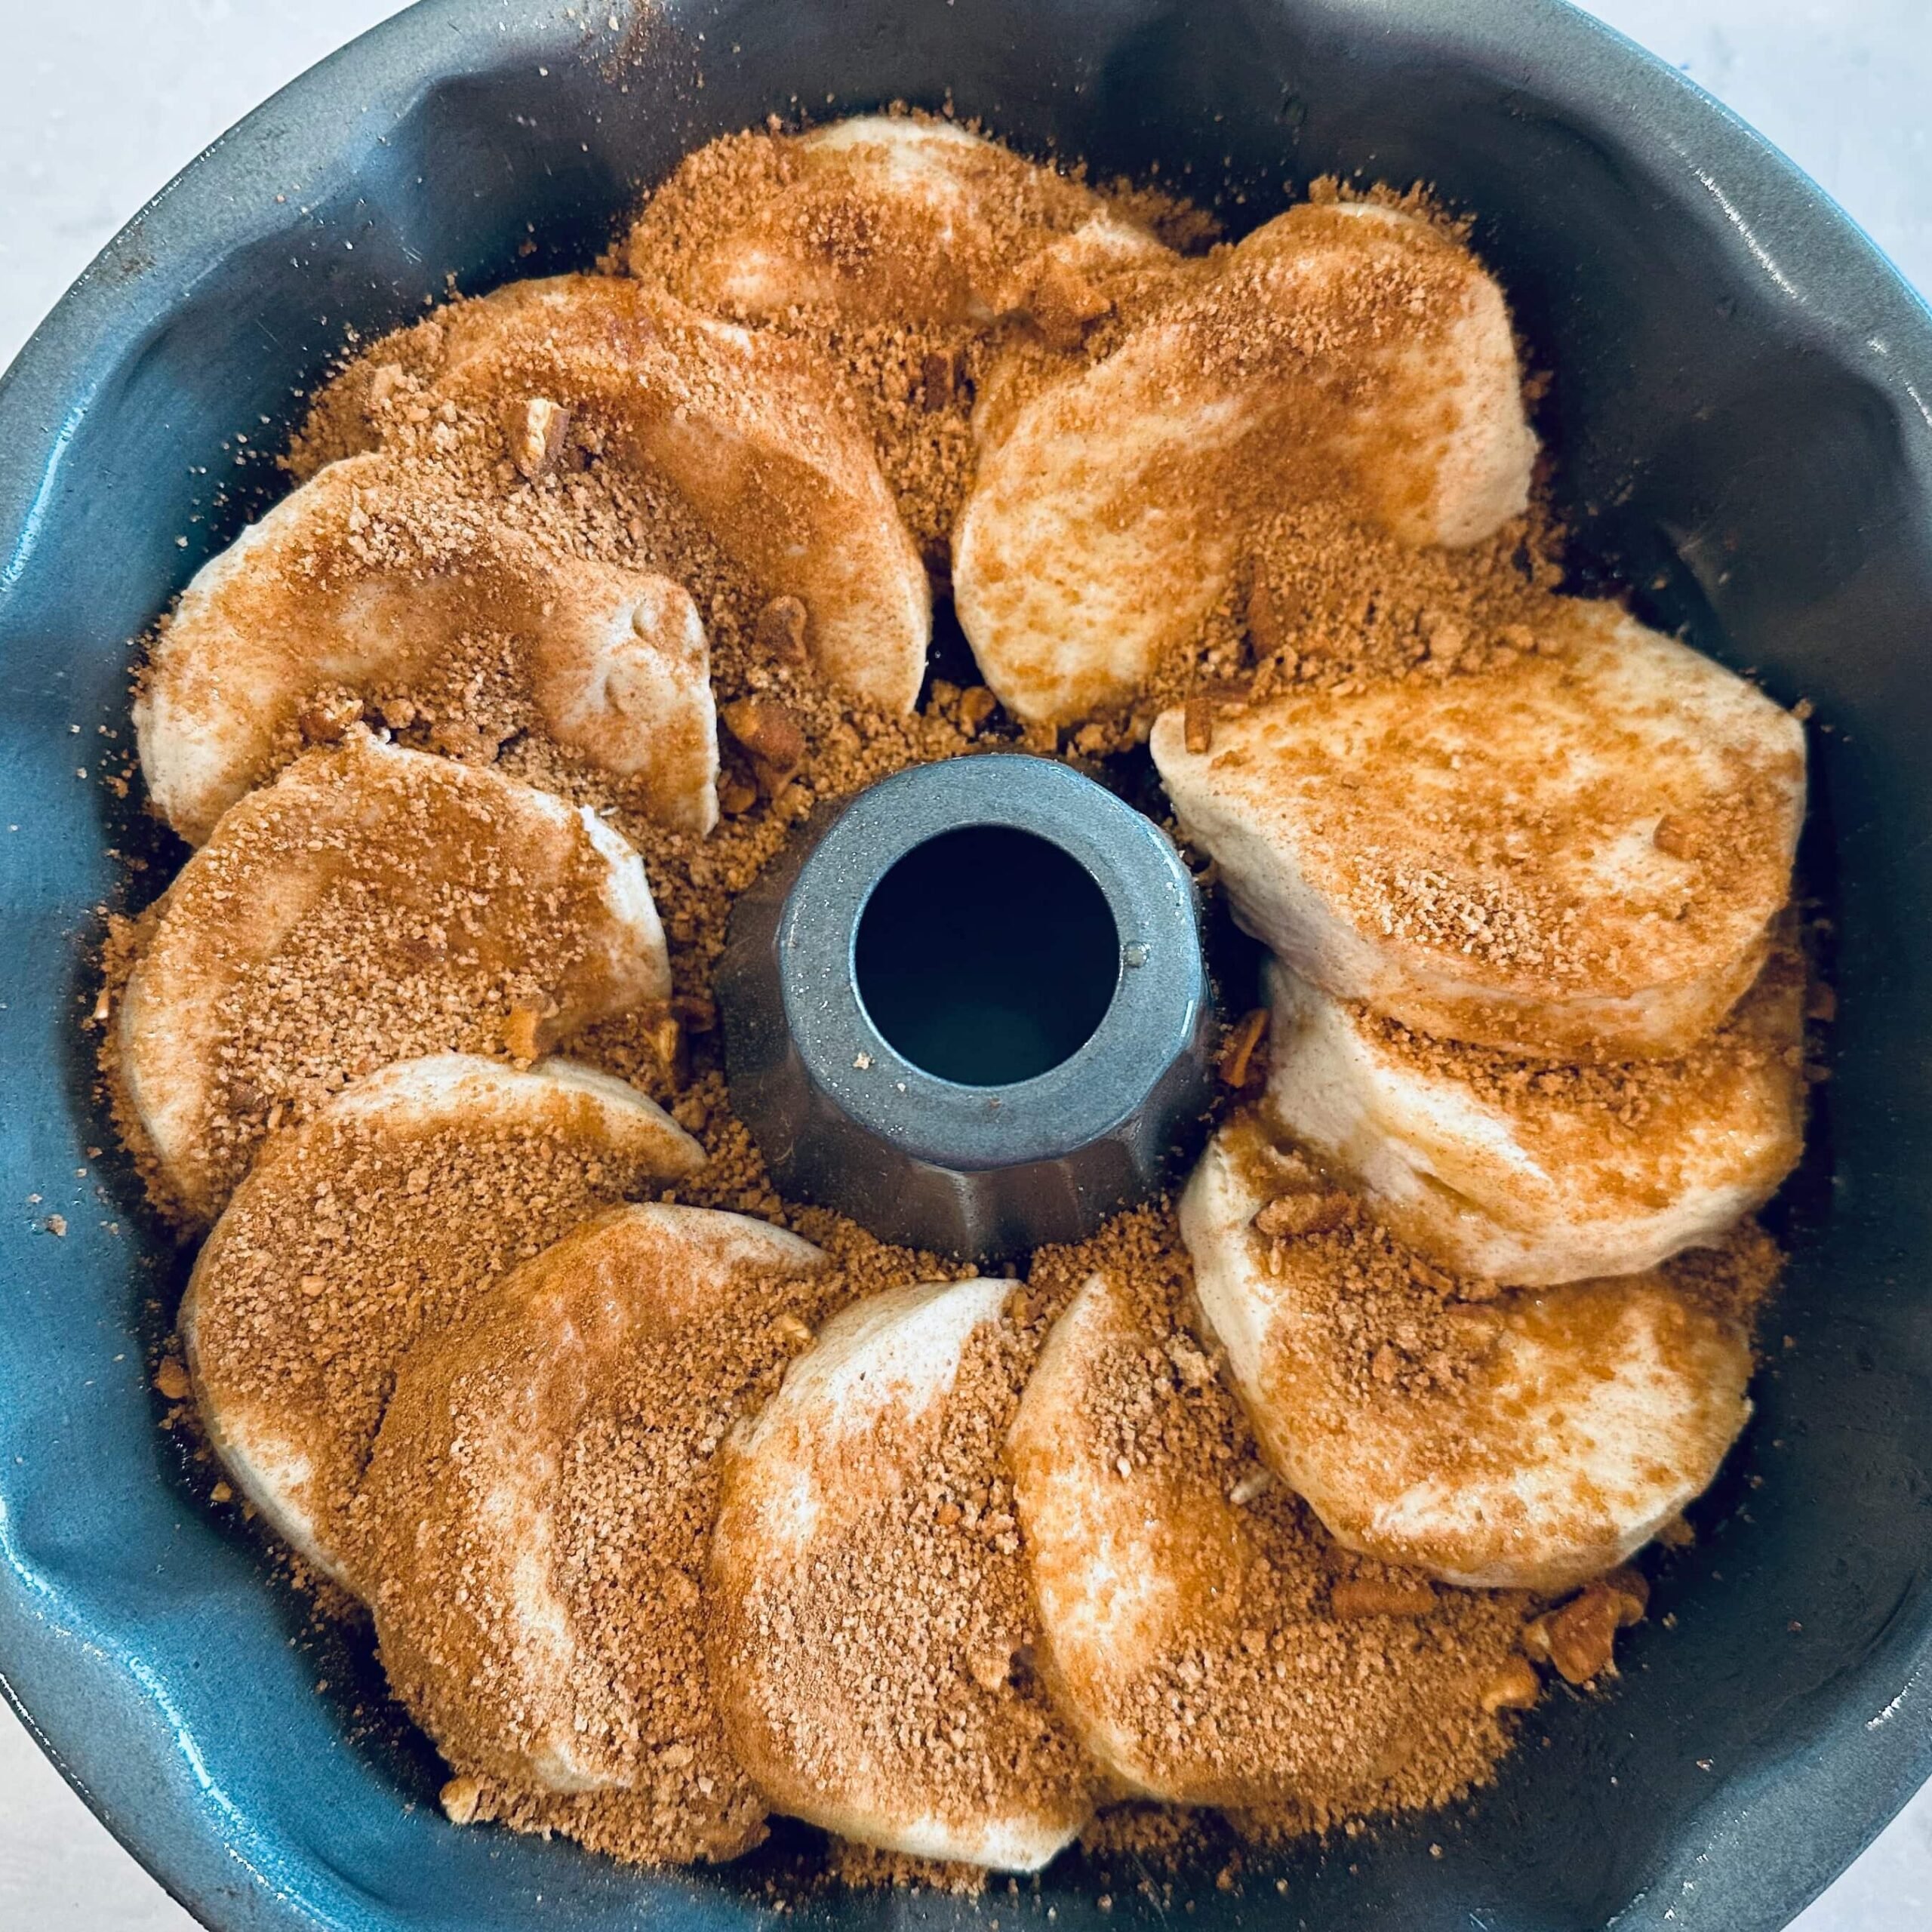 Overlapping biscuits in a bundt pan covered with cinnamon and brown sugar to make sticky buns.